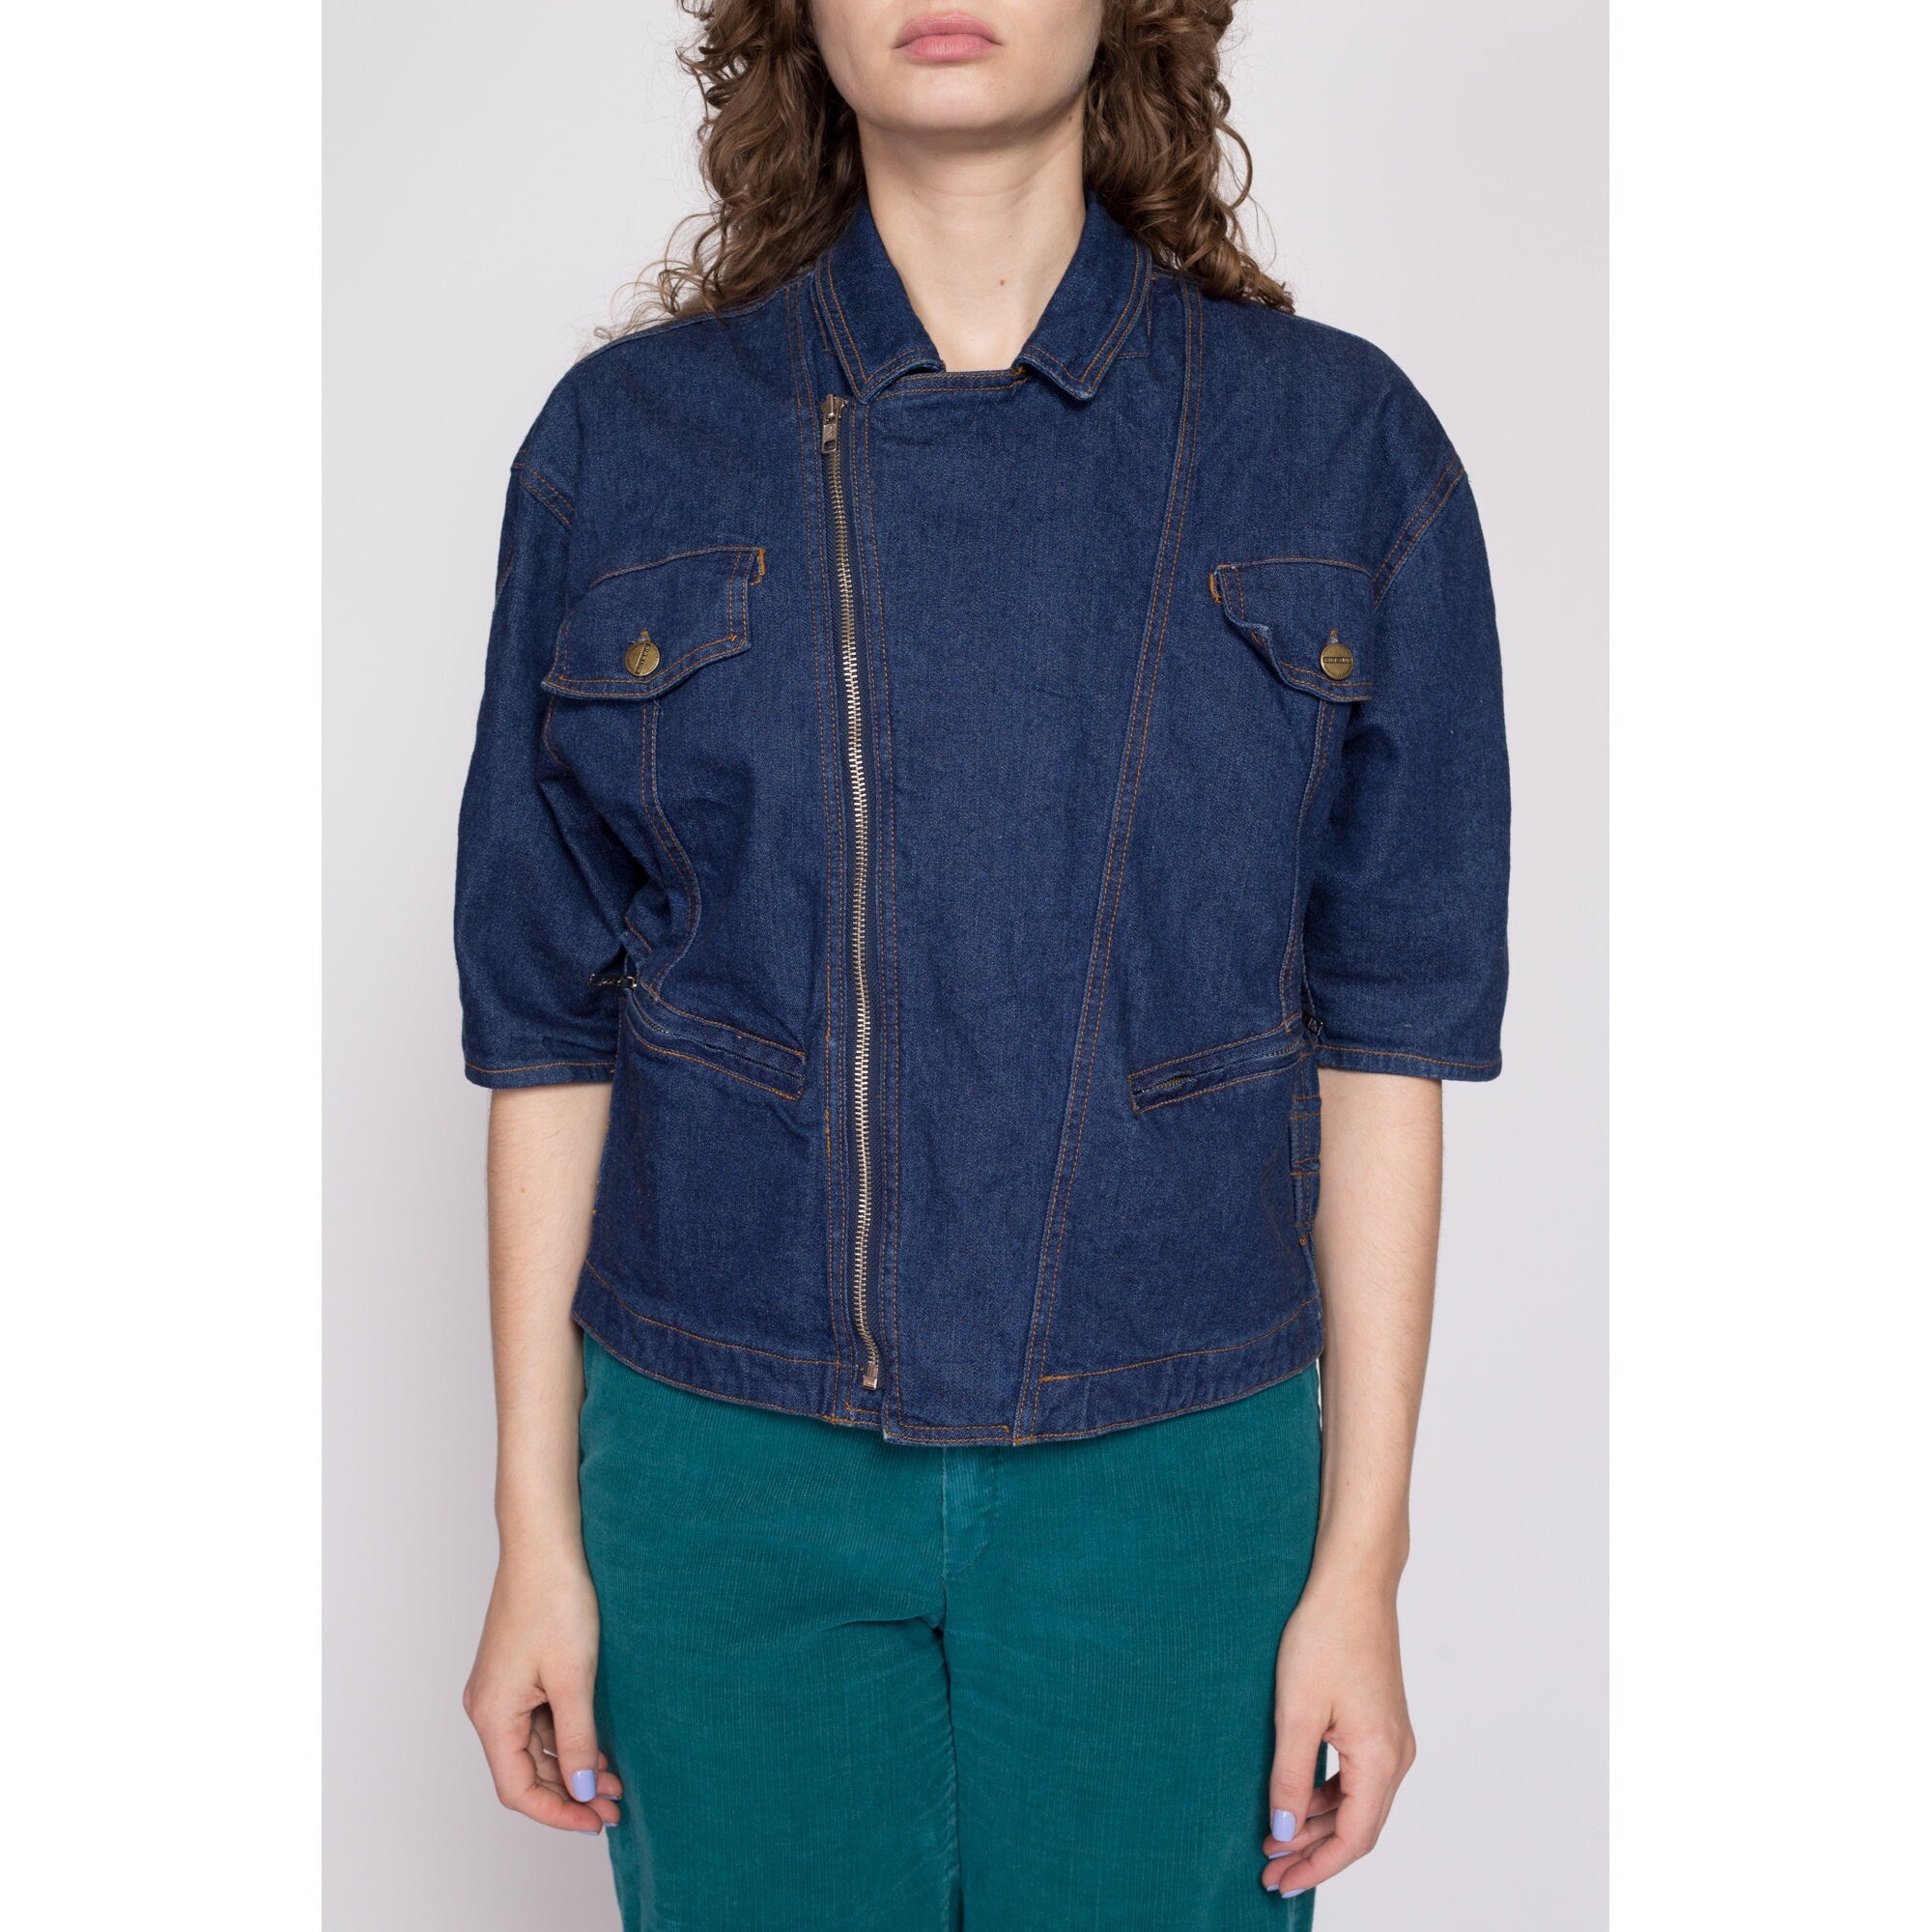 Womens Casual Denim Denim Coat With Drop Shoulder Pocket Short Sleeve  Single Breasted Crop Top From Maoku, $24.64 | DHgate.Com